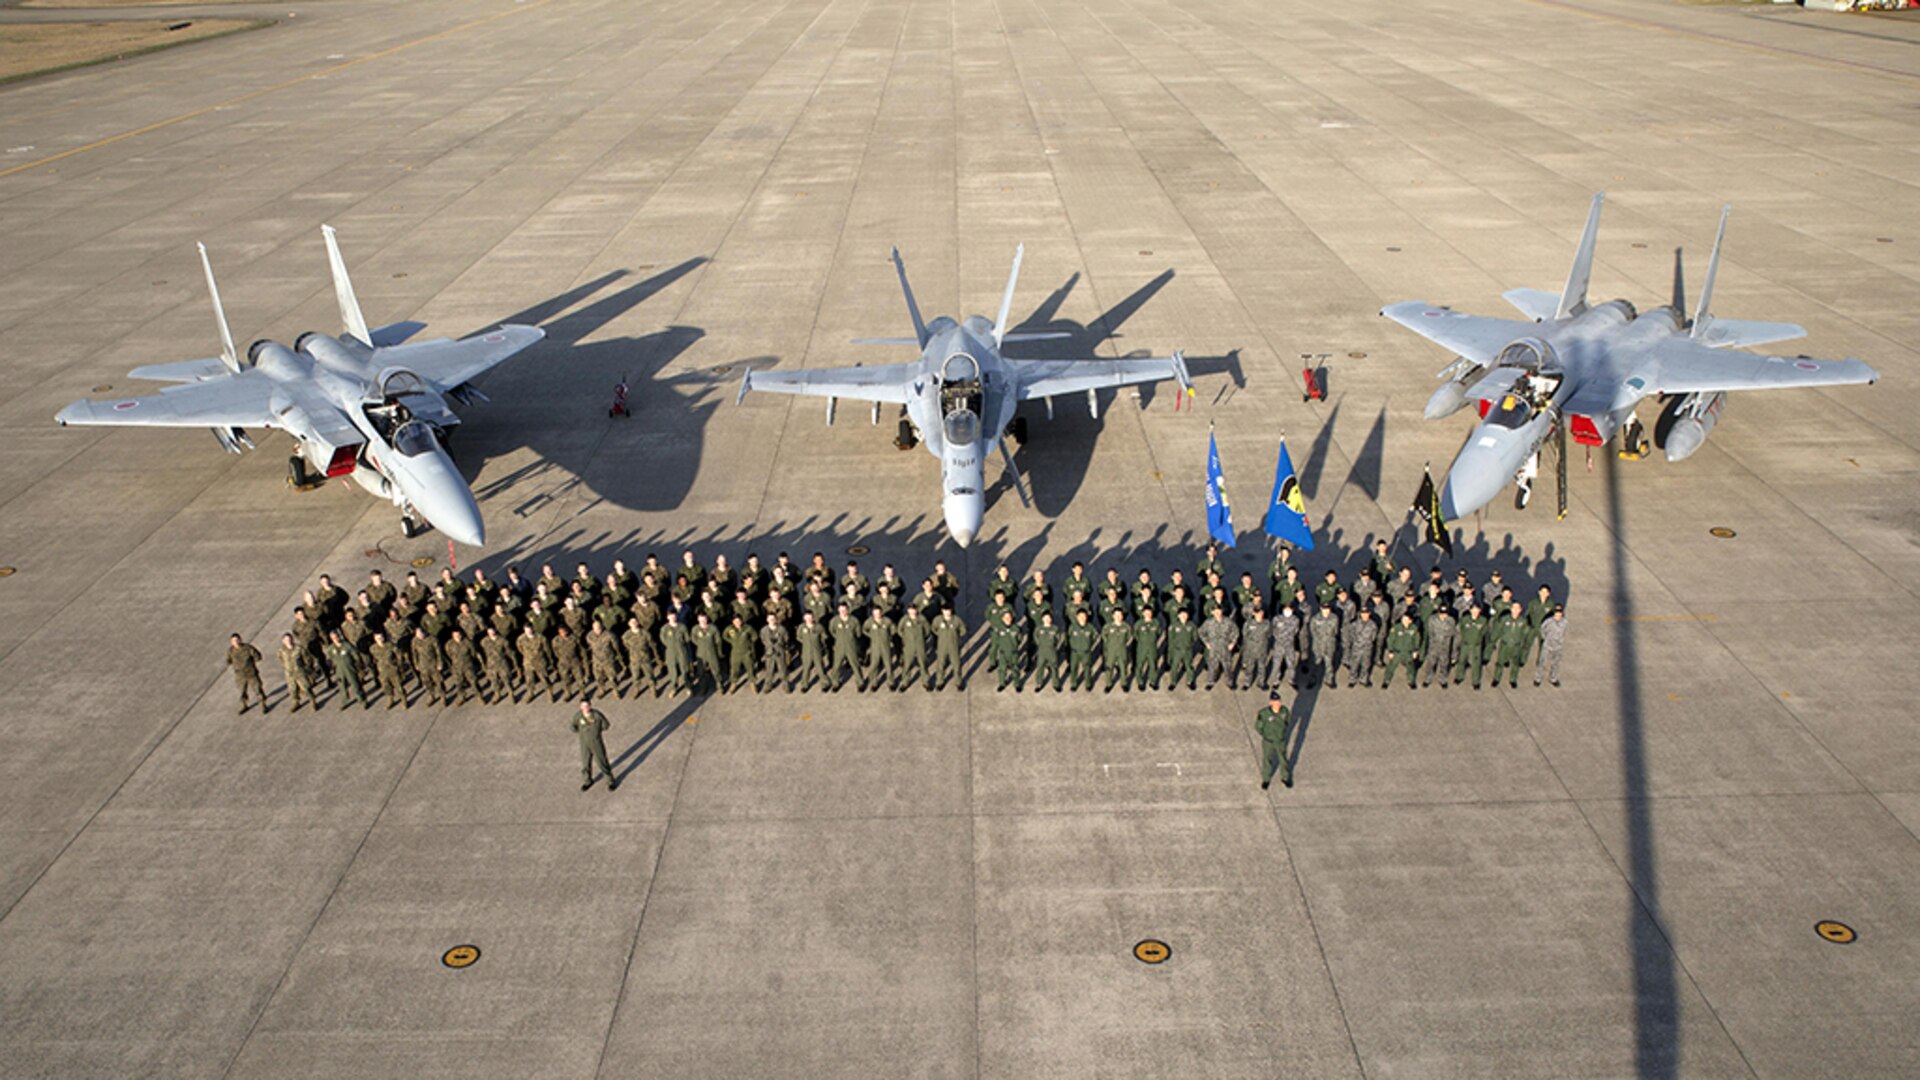 Members of Marine Fighter Attack Squadron (VMFA) 314 and Japan Air Self-Defense pose for a photo in front of an F/A-18AA++ and two F-15s at Komatsu Air Base, Japan, during the Komatsu Aviation Training Relocation exercise March 17, 2016. VMFA-314, home based out of Marine Corps Air Station Miramar, San Diego, temporarily deployed to MCAS Iwakuni for a six month rotation with the unit deployment program, is forward deployed to Komatsu, Japan for the ATR.  Komatsu ATR is a dissimilar air combat training exercise allowing pilots with diverse aircraft to simulate aerial warfare and execute basic fighter maneuvers, aircraft tactical intercepts and offensive-defensive counter air missions in preparation for real wartime situations. 